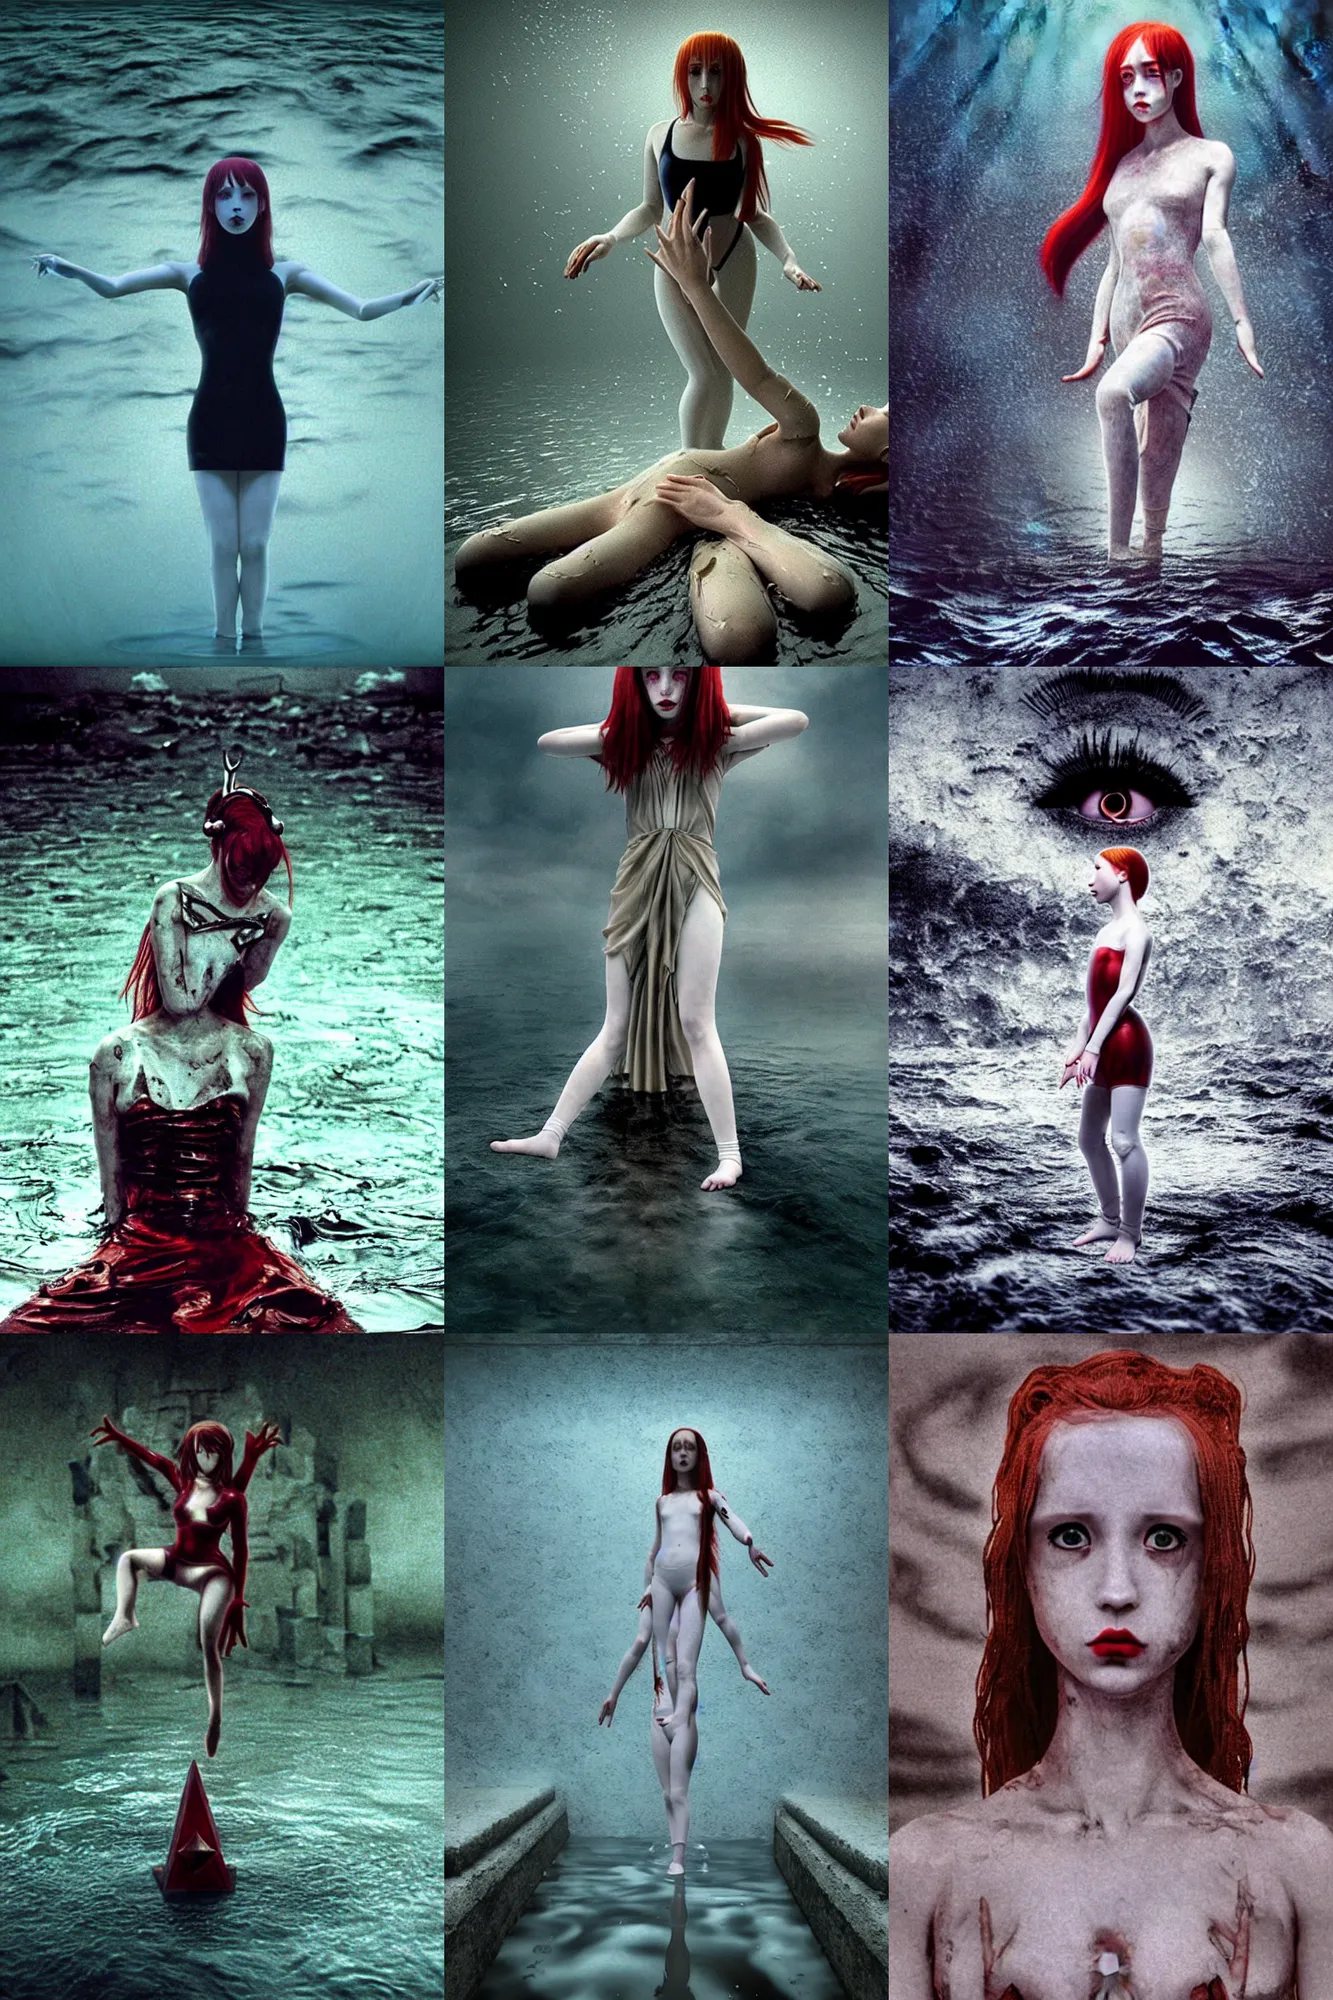 Prompt: Demonic masonic Holly Herndon style occult hyperrealism cinematic seinen manga Fashion style tomb(1997) movie still, submerged temple scene, , pointé pose;pursed lips, athletic, terrified 👿 , eye contact,harajuku hair, wearing 🔥 mercury Balenciaga dress ,specular highlights, half submerged in heavy oil flood, oil to waist, , ,eye contact, ultra realistic, tilt shift background, Panavision Panaflex X III , Technicolor, 8K, 35mm lens, three point perspective, chiaroscuro, highly detailed, devine composition golden ration,by Allister Crowley, by moma, by Nabbteeri by Sergey Piskunov